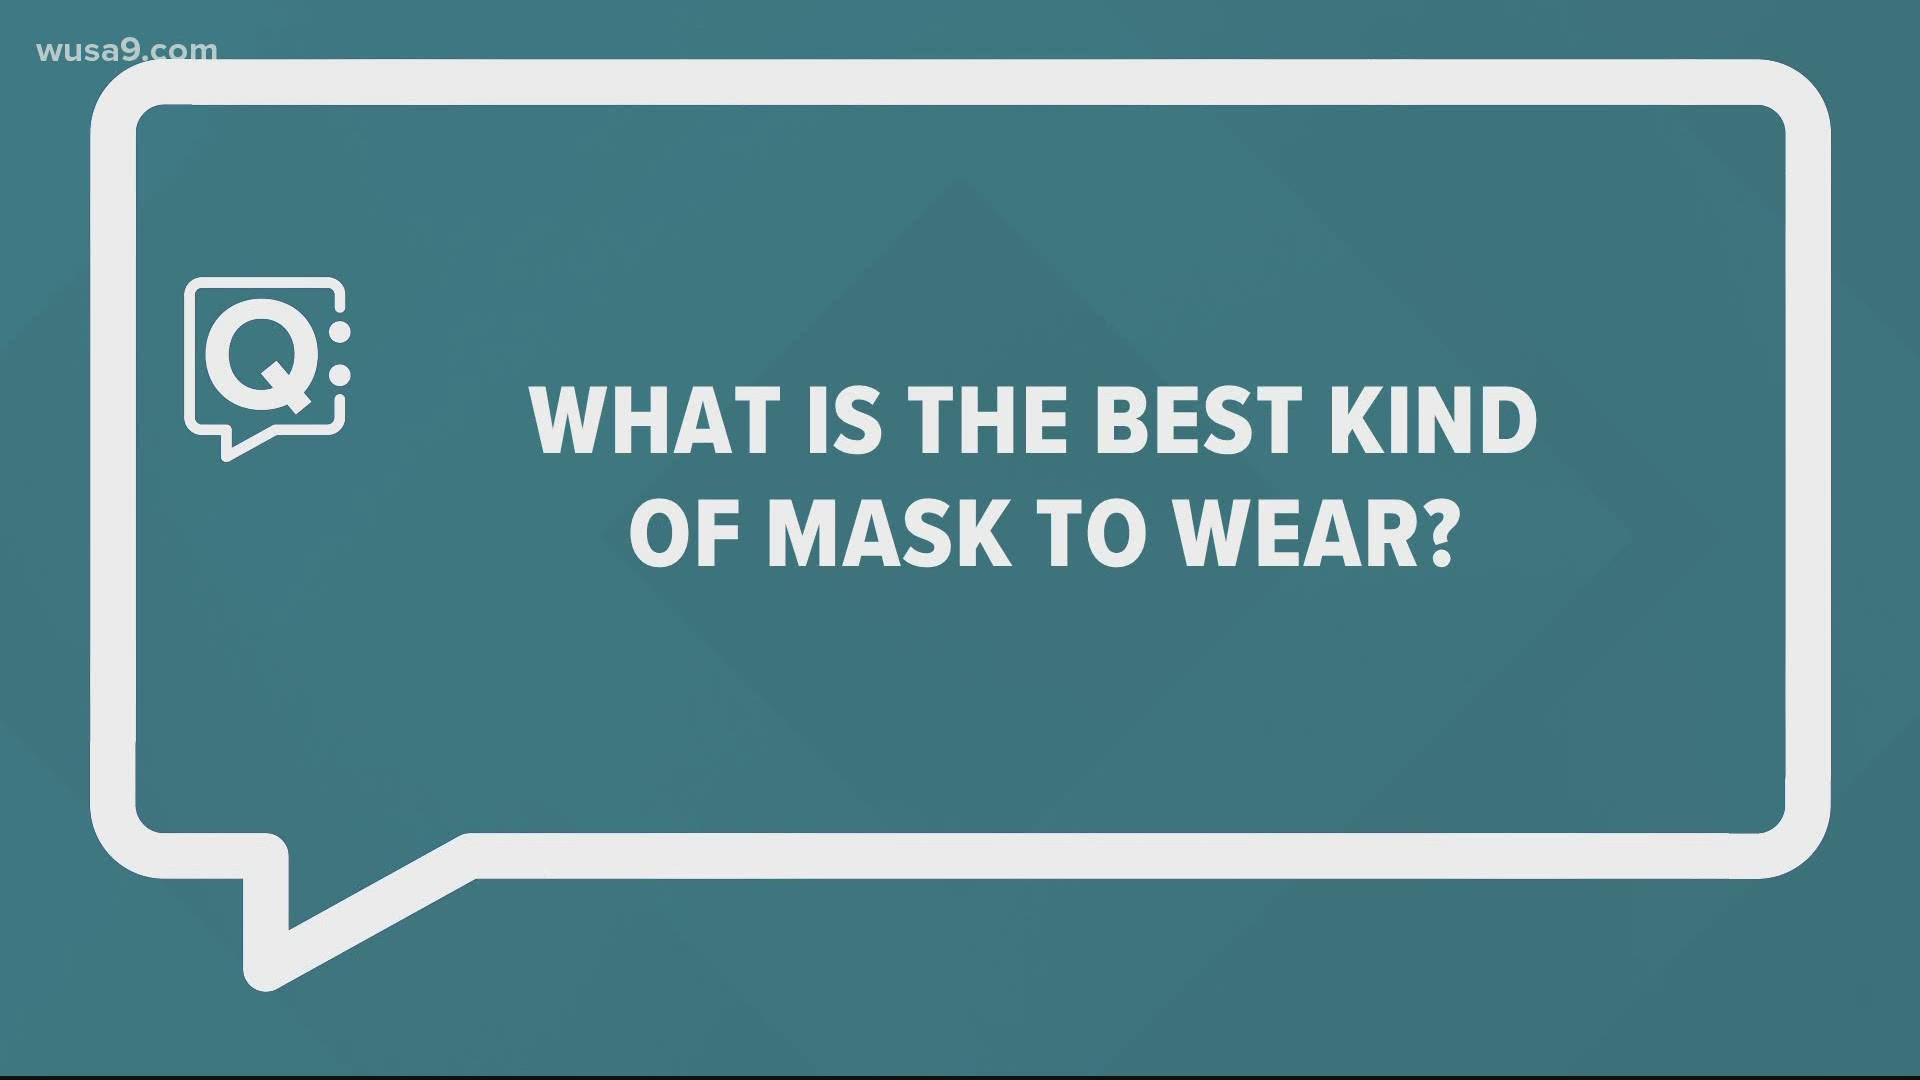 The Q and A team is checking back in on masks. Do we need to improve them?
We went to an expert in the Johns Hopkins Hospital Bio-Containment Unit to learn more.